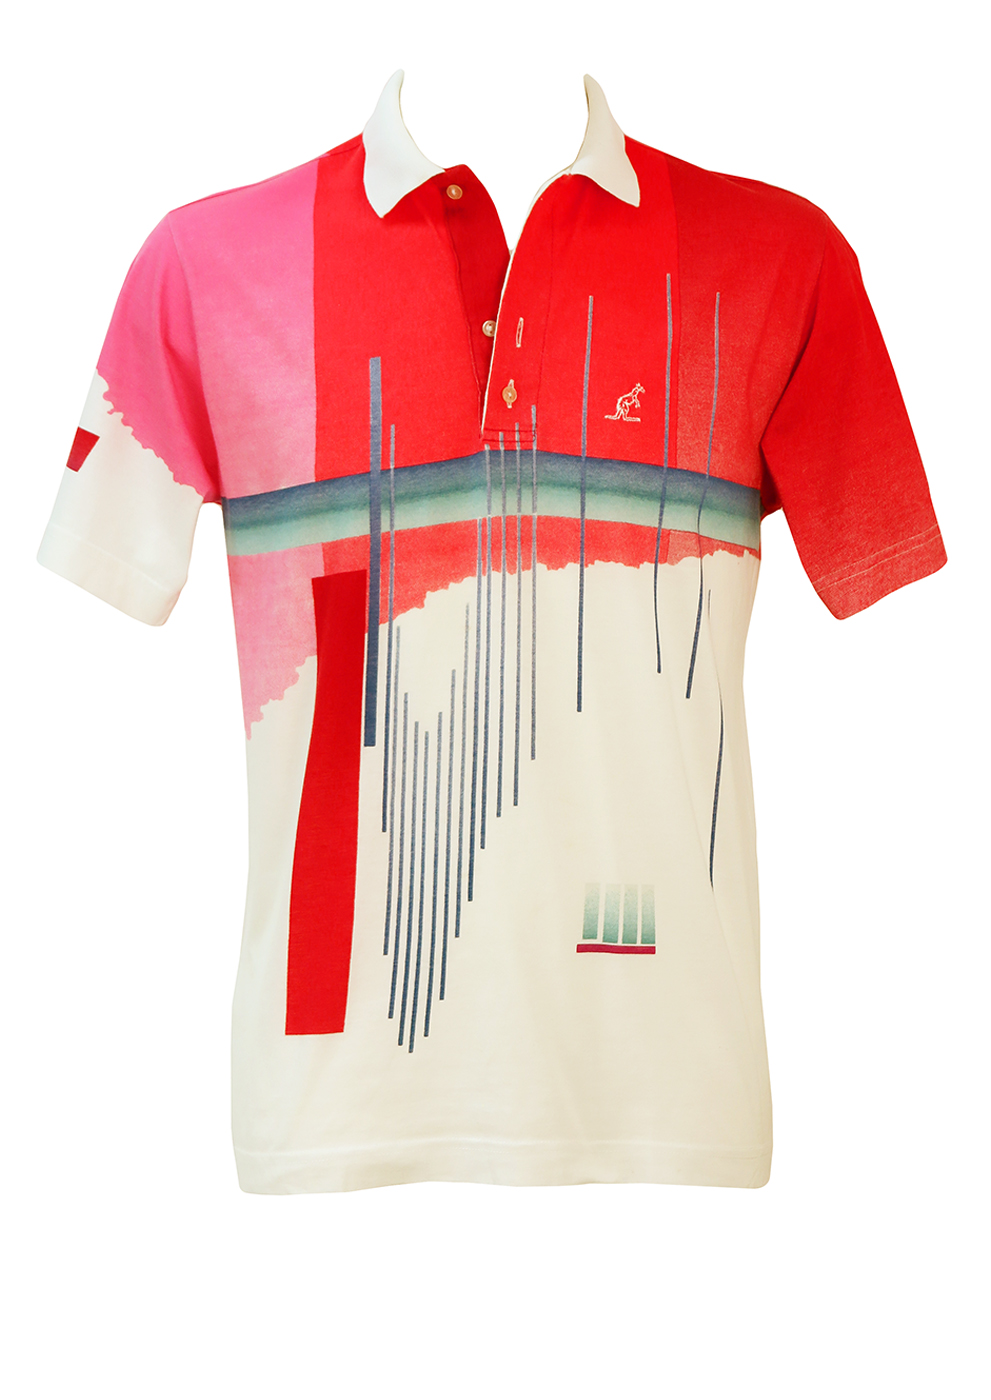 Australian L'Alpina Polo Shirt with Red, Pink, Blue & White Graphic ...